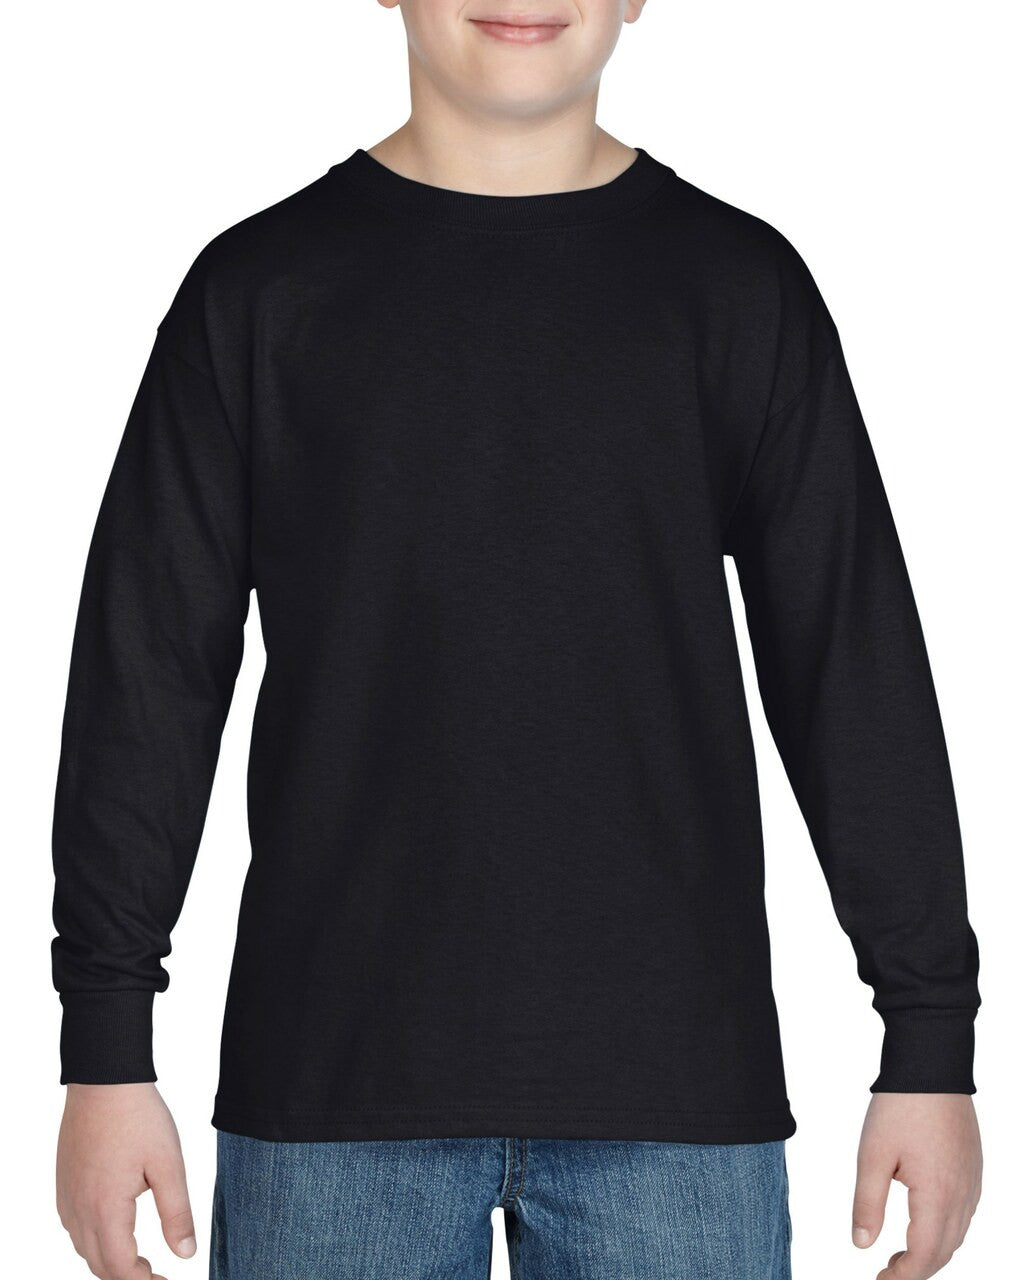 Youth Heavy Cotton L/S T-Shirt